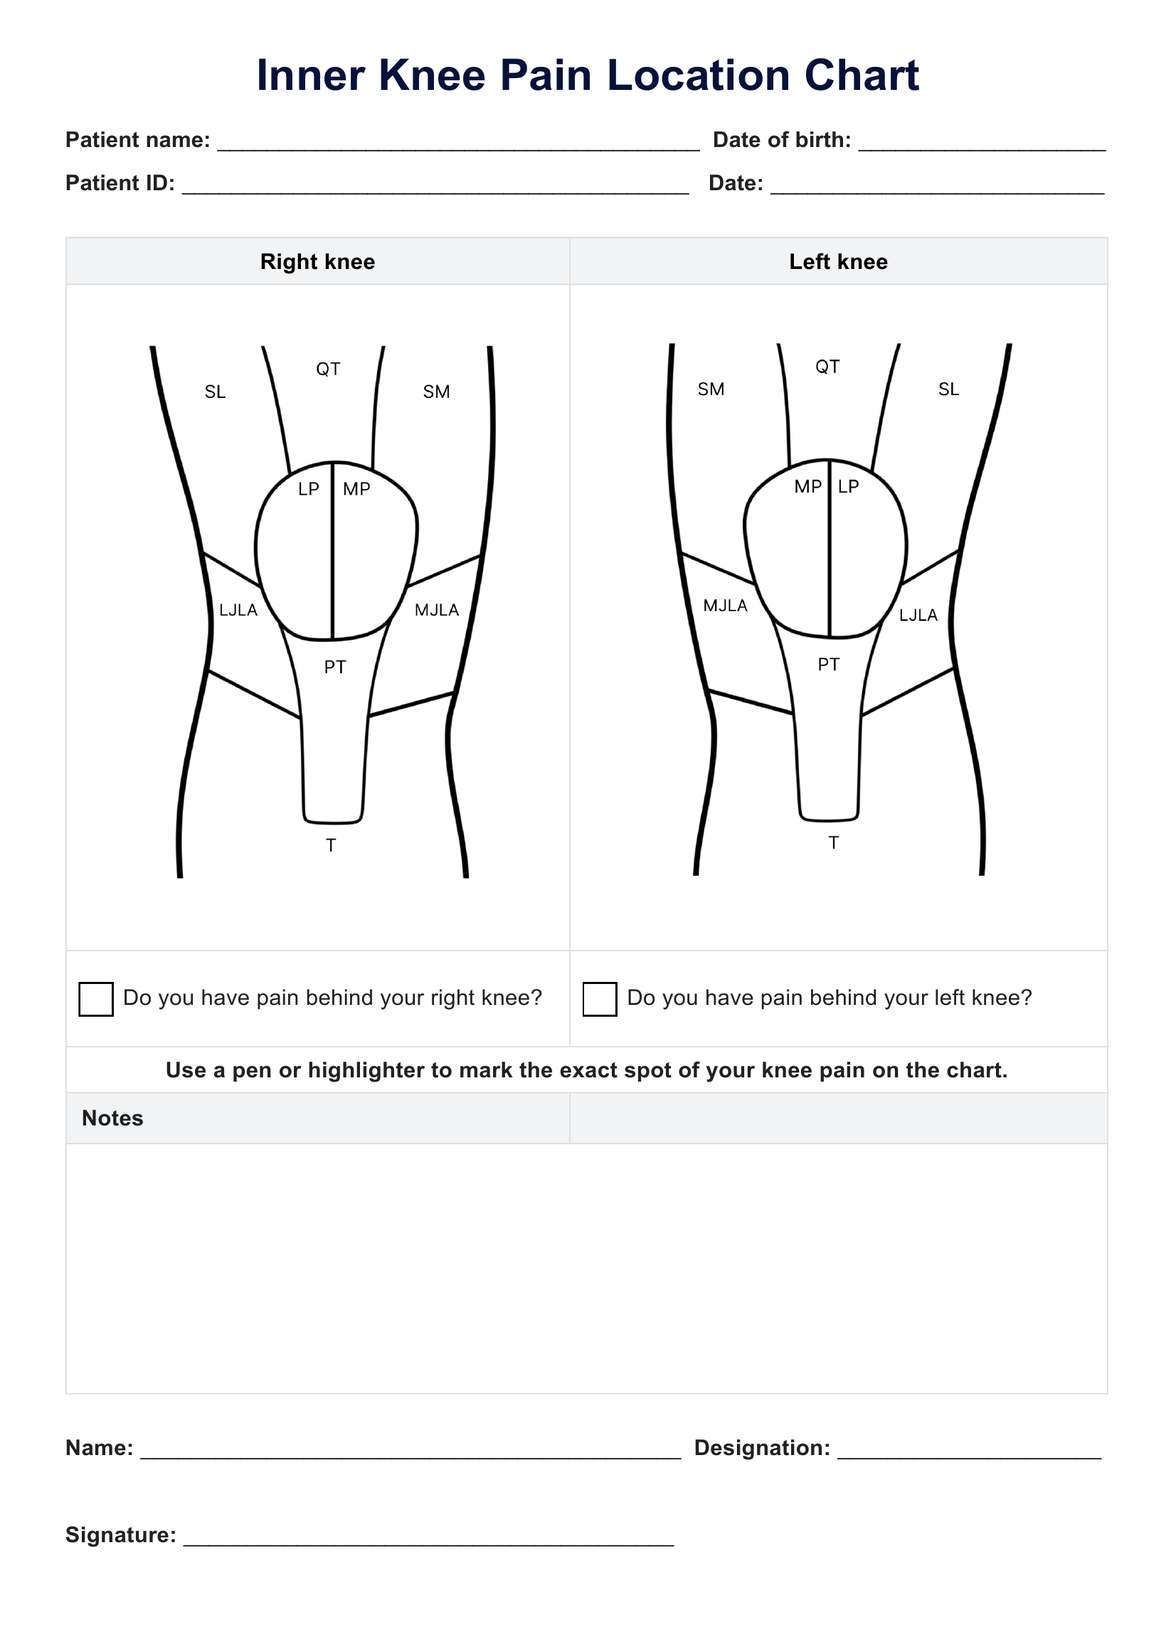 Inner Knee Pain Location Charts PDF Example